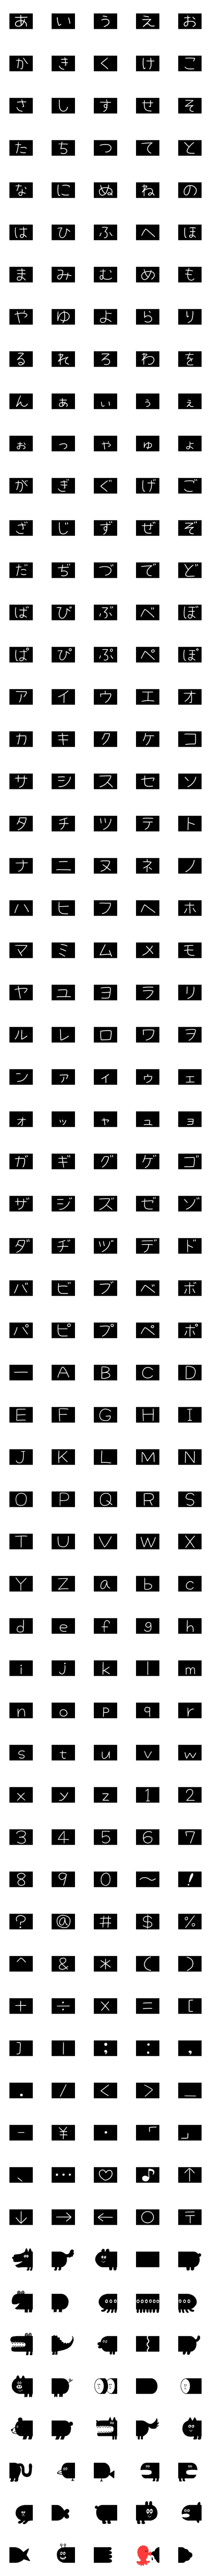 [LINE絵文字]文字をのせると伸びる生き物3(黒)の画像一覧